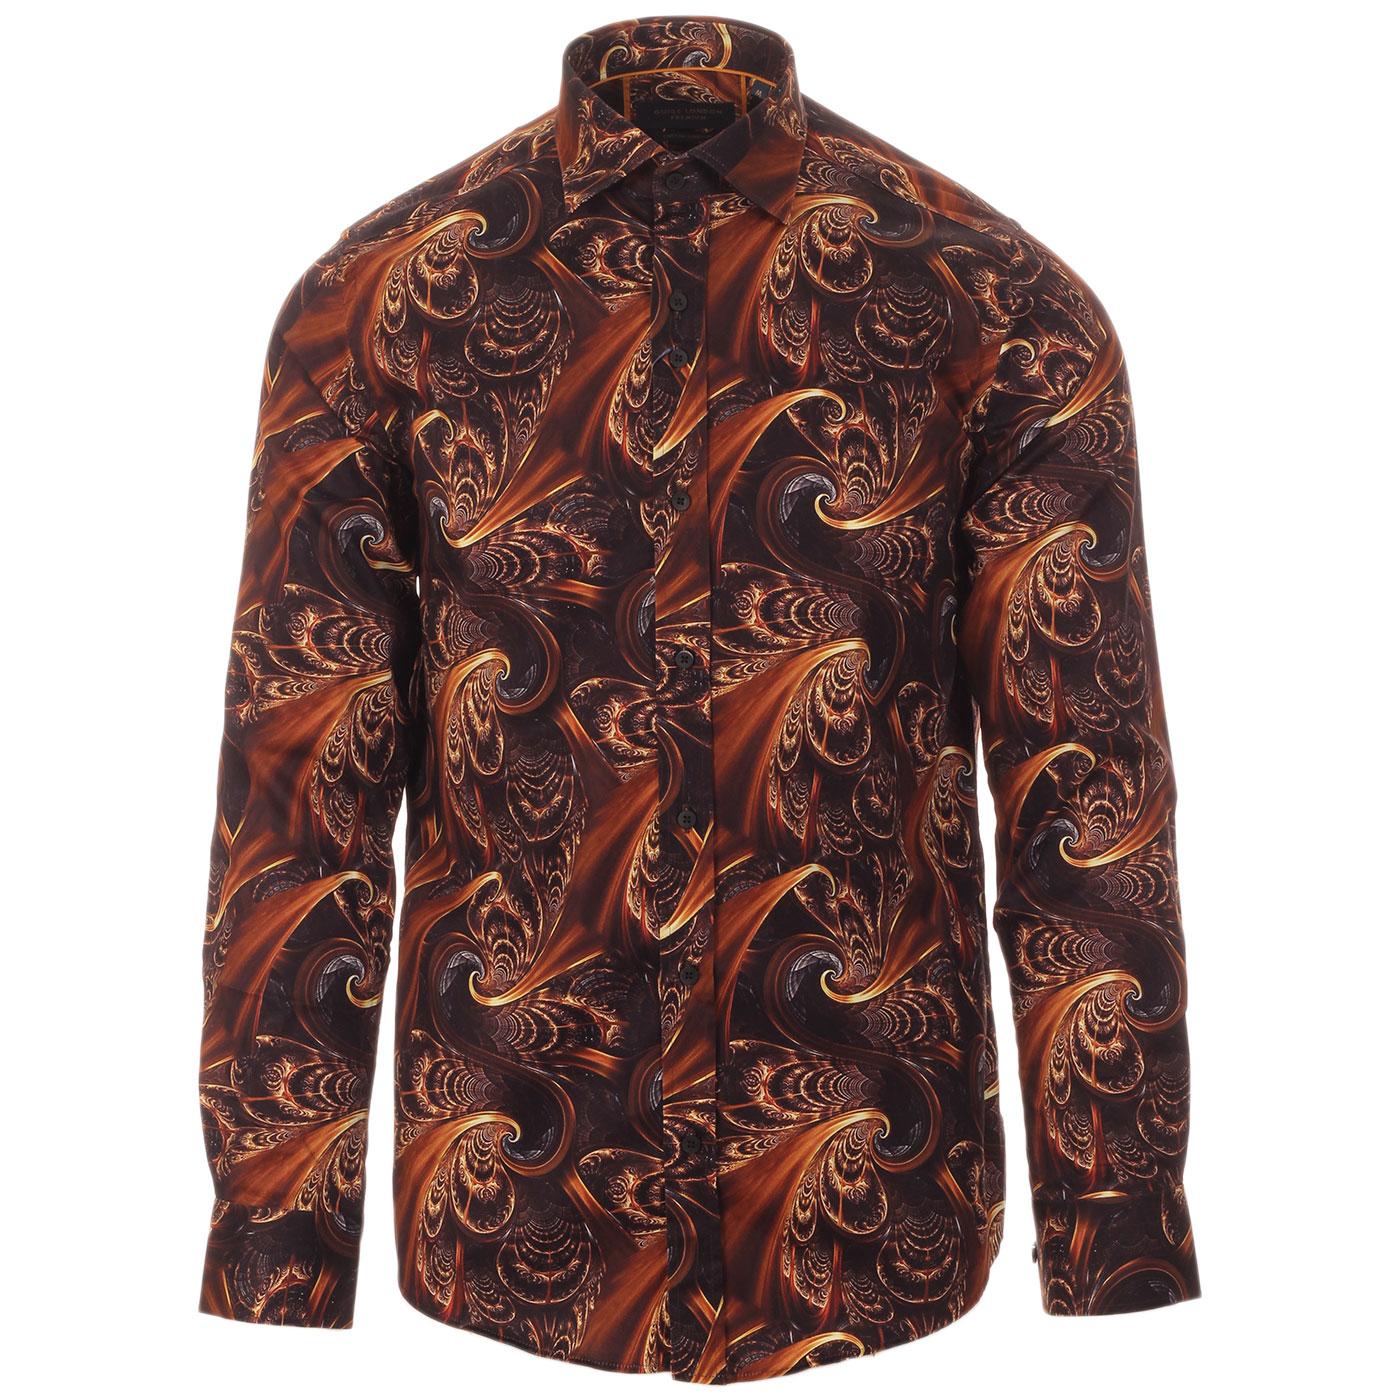 GUIDE LONDON Retro Psychedelic Spiral Print Shirt